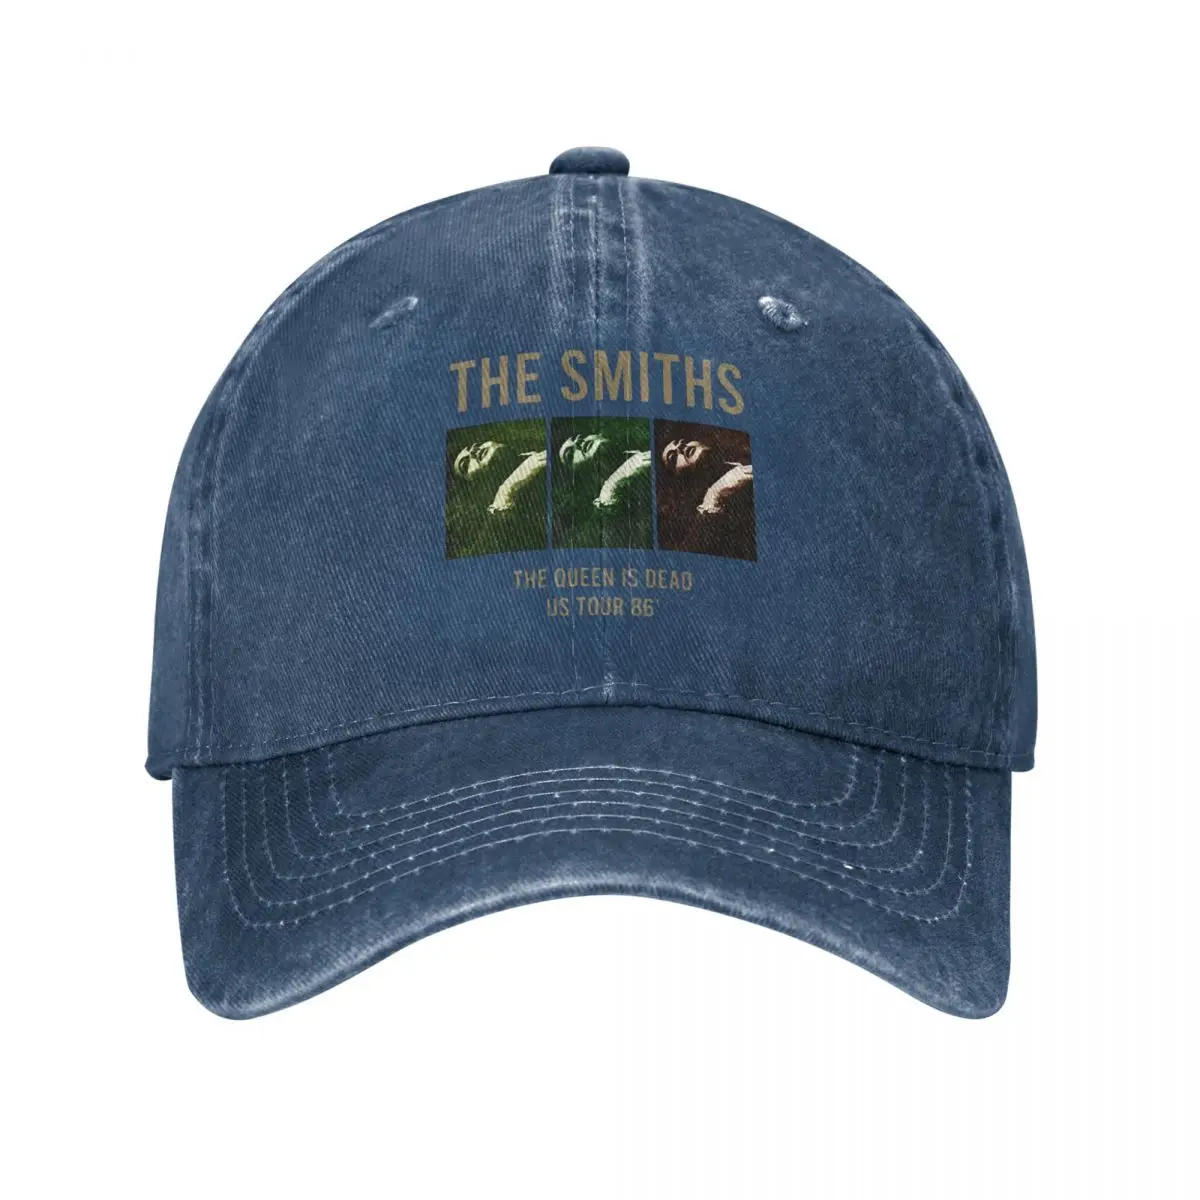 

The Smiths Rock Baseball Caps Vintage Distressed Washed The Queen Is Dead Snapback Hat Men Women Outdoor Adjustable Fit Caps Hat